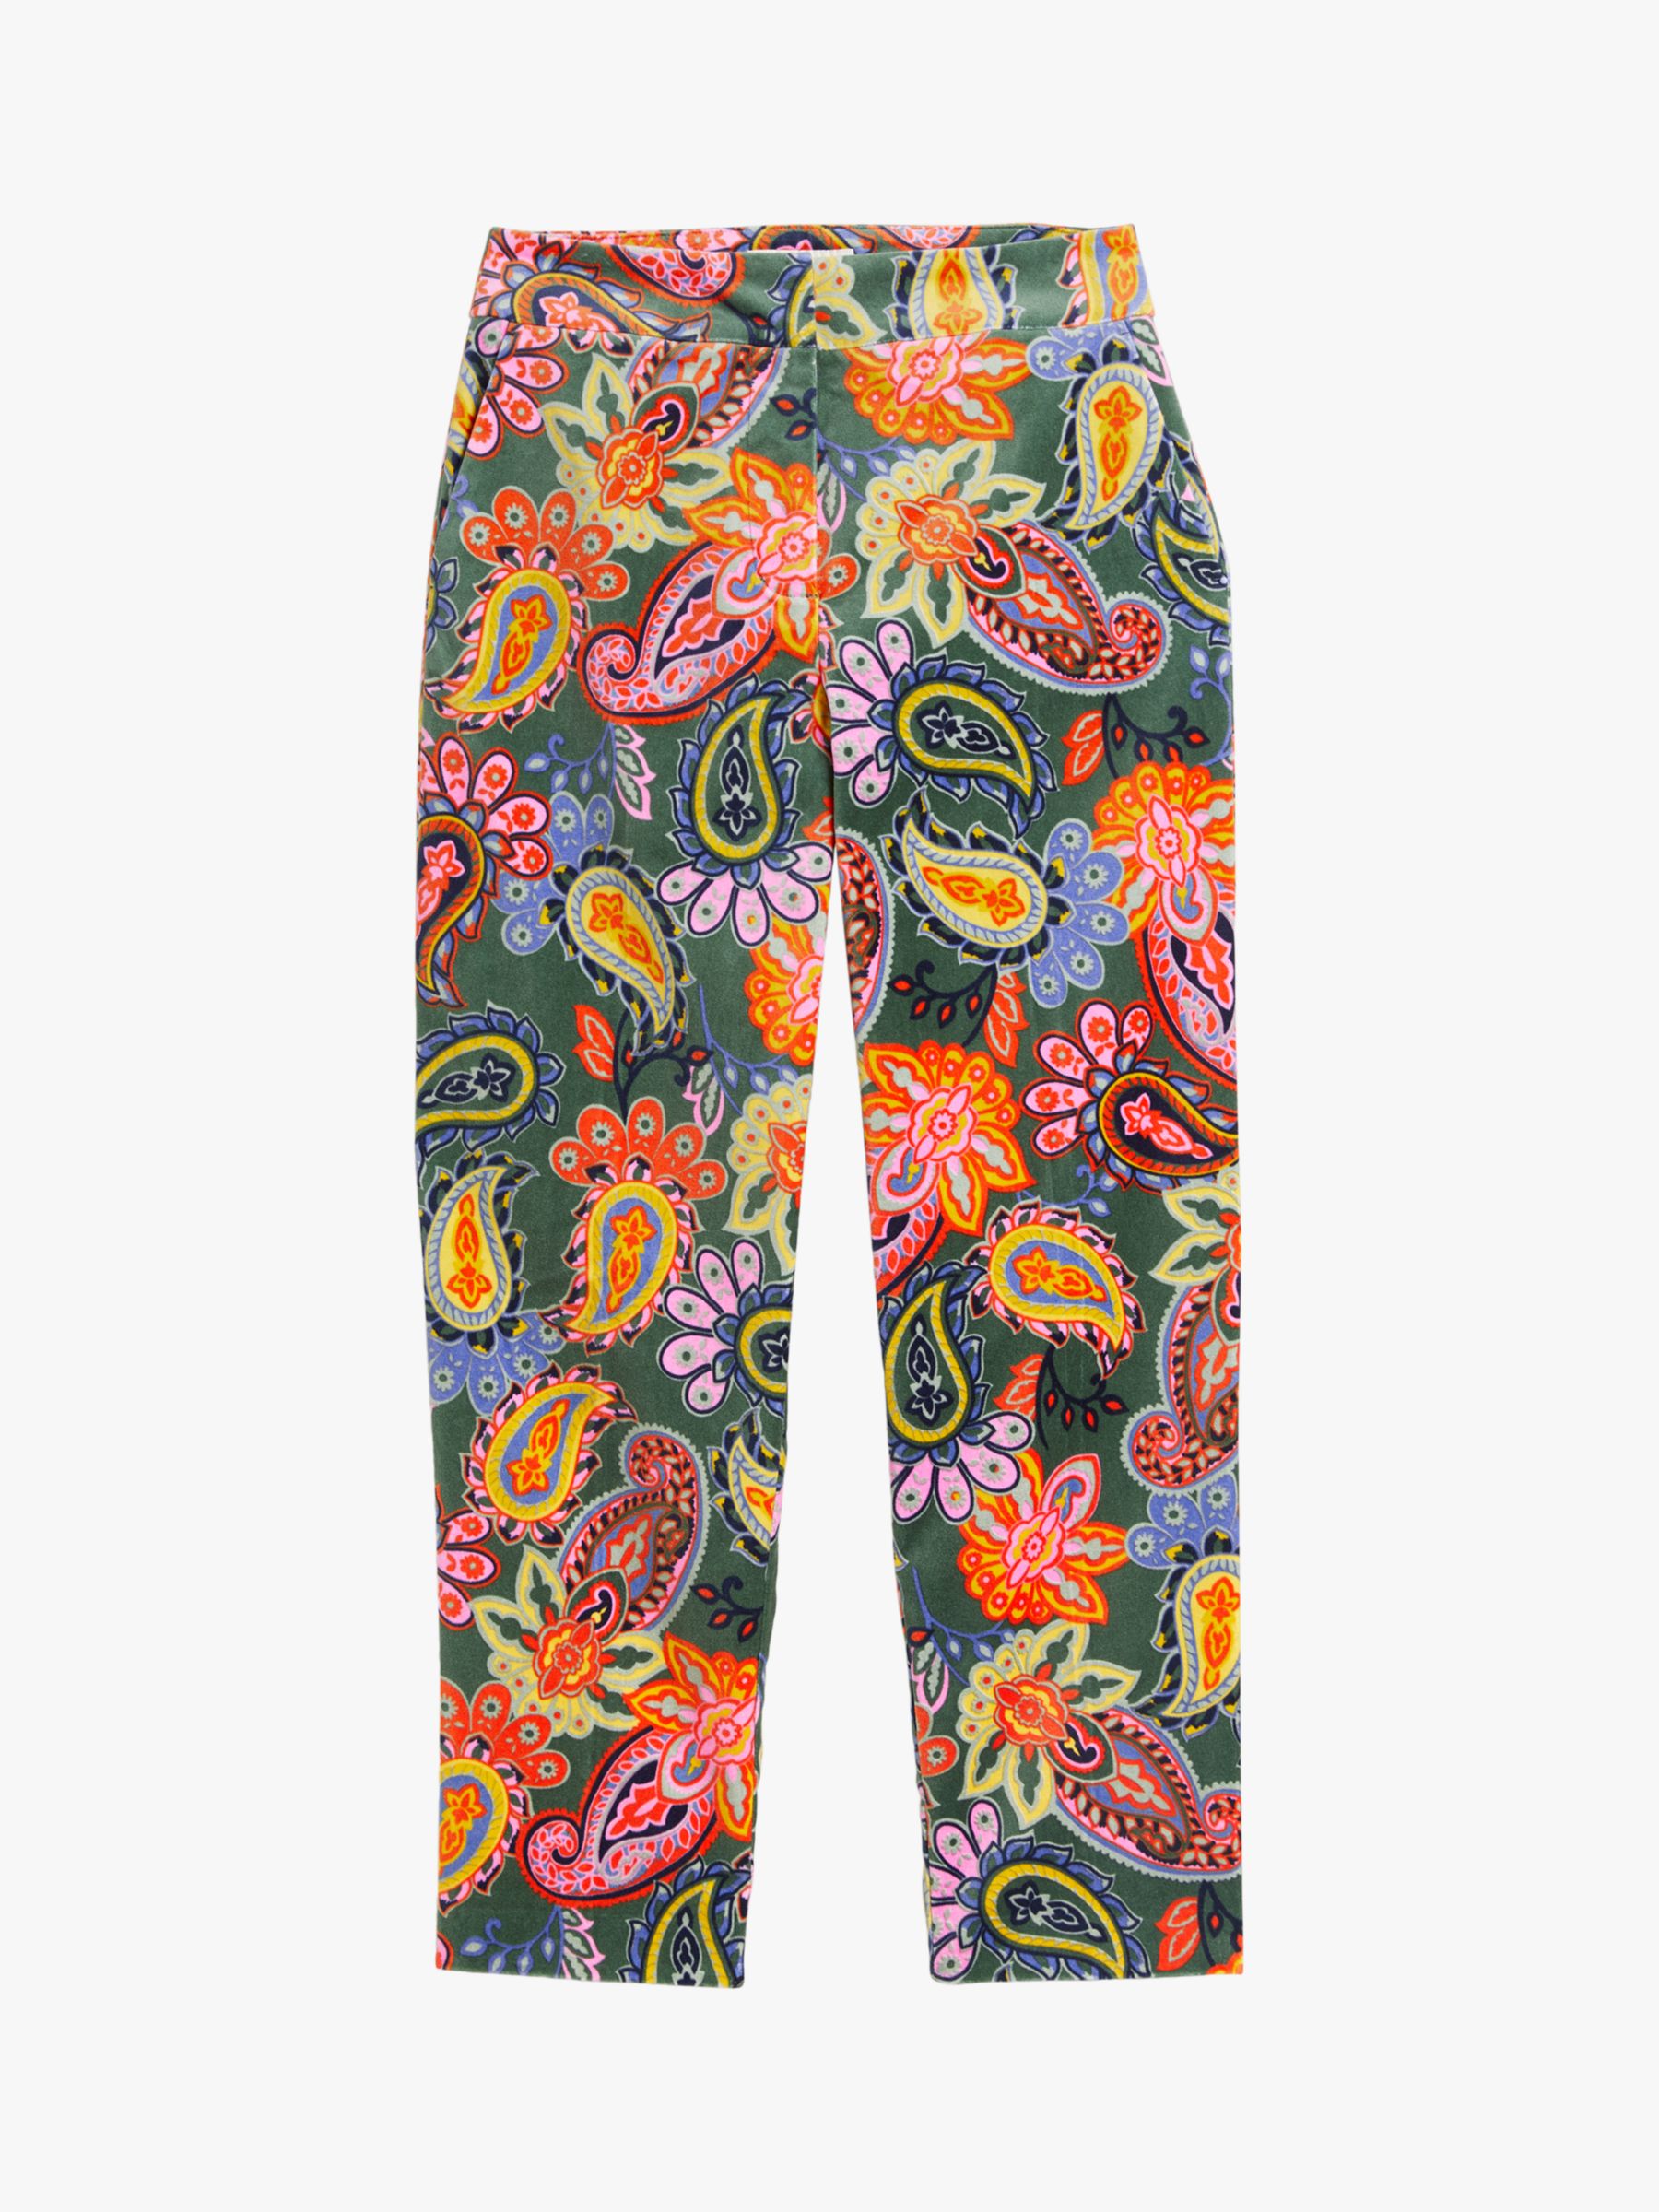 Boden Paisley Print Cropped Trousers, Green/Multi at John Lewis & Partners